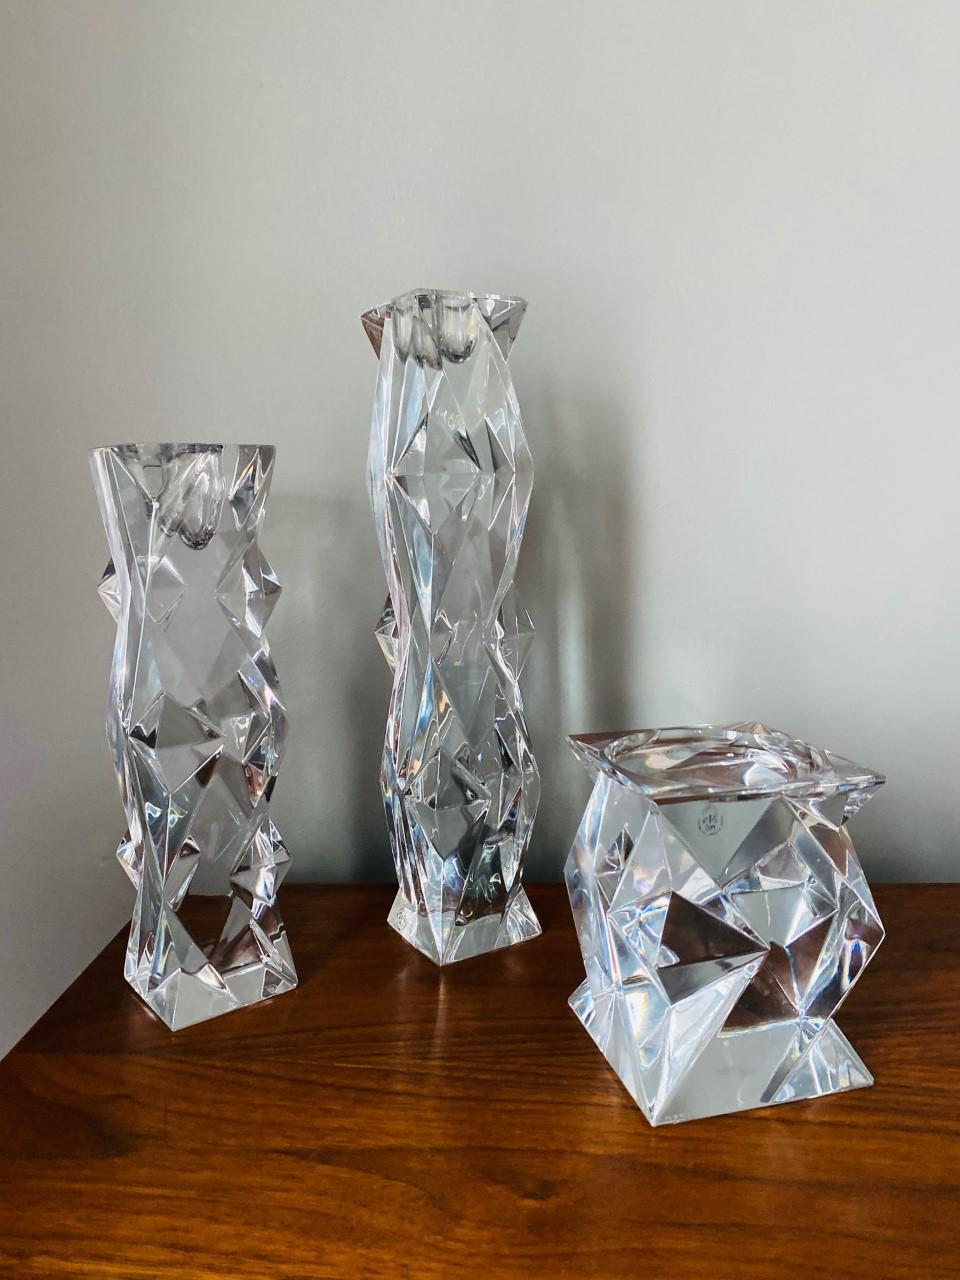 Hand-Crafted Vintage Stylized Lead Crystal Candle Holder Set of 3 by Libera Czech